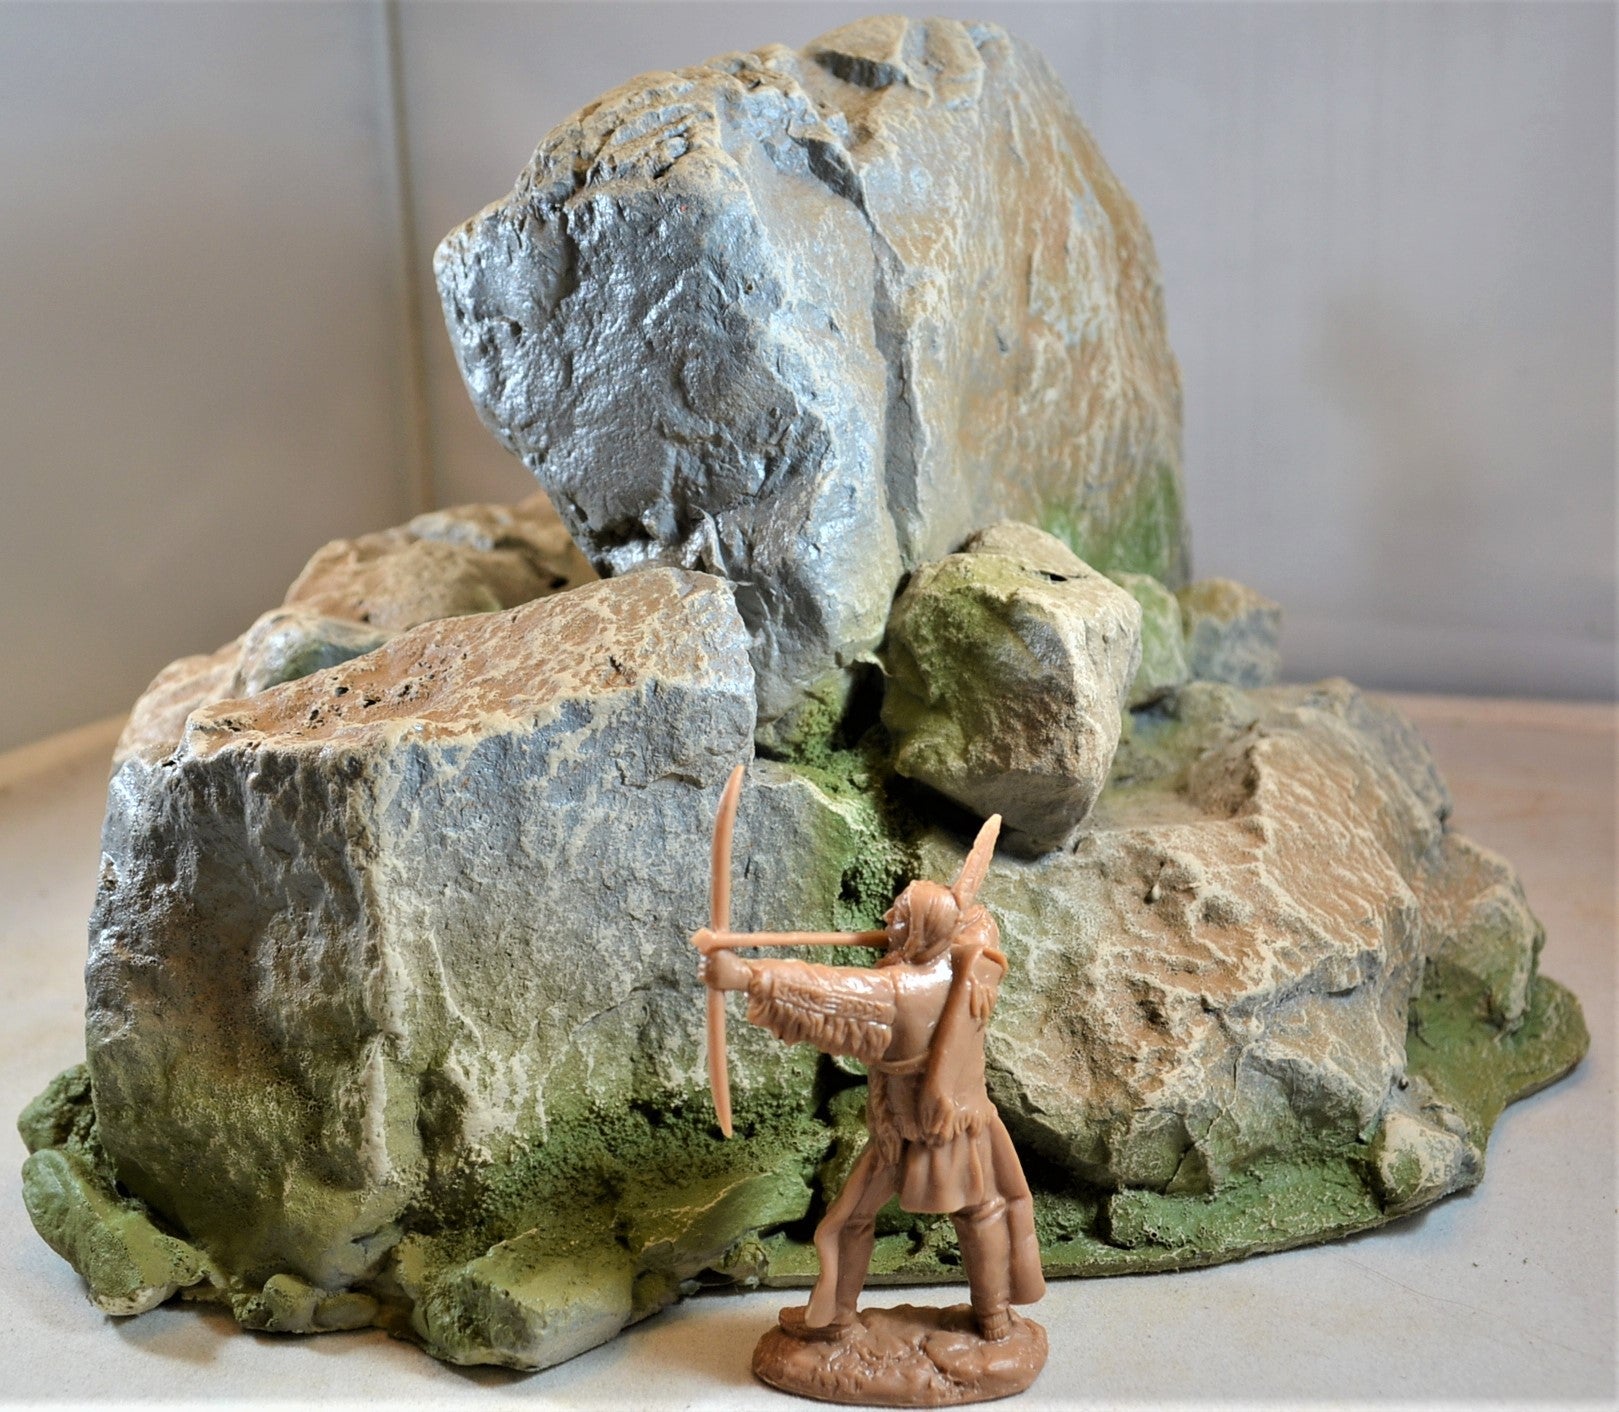 ATHERTON SCENICS PAINTED STONE ROCK BOULDER OUTCROPPING DIORAMA PIECE - 9926